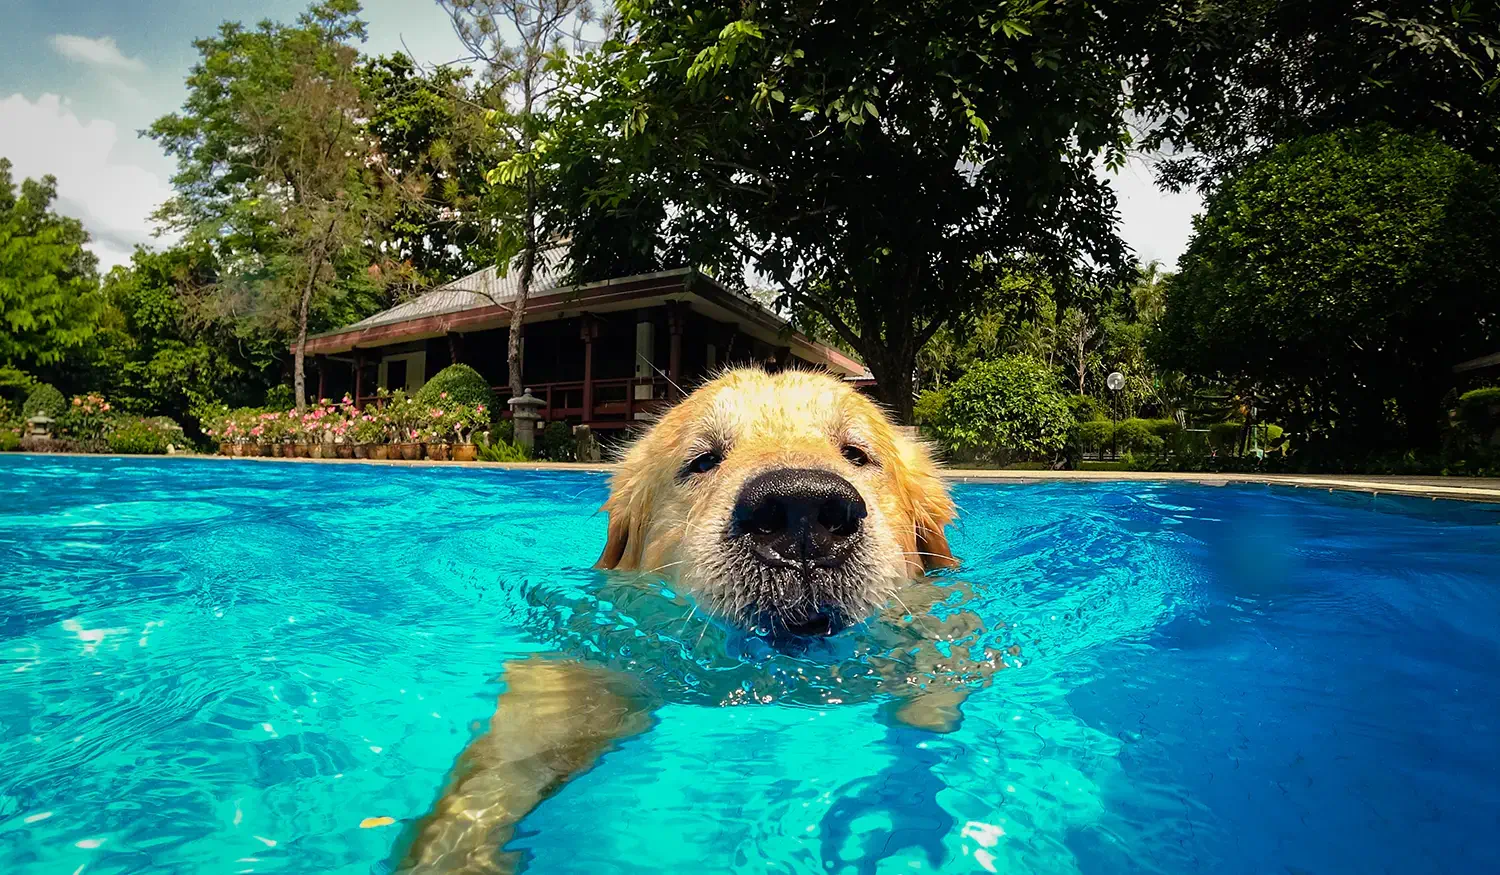 Why fiberglass pools are perfect for pet-friendly families